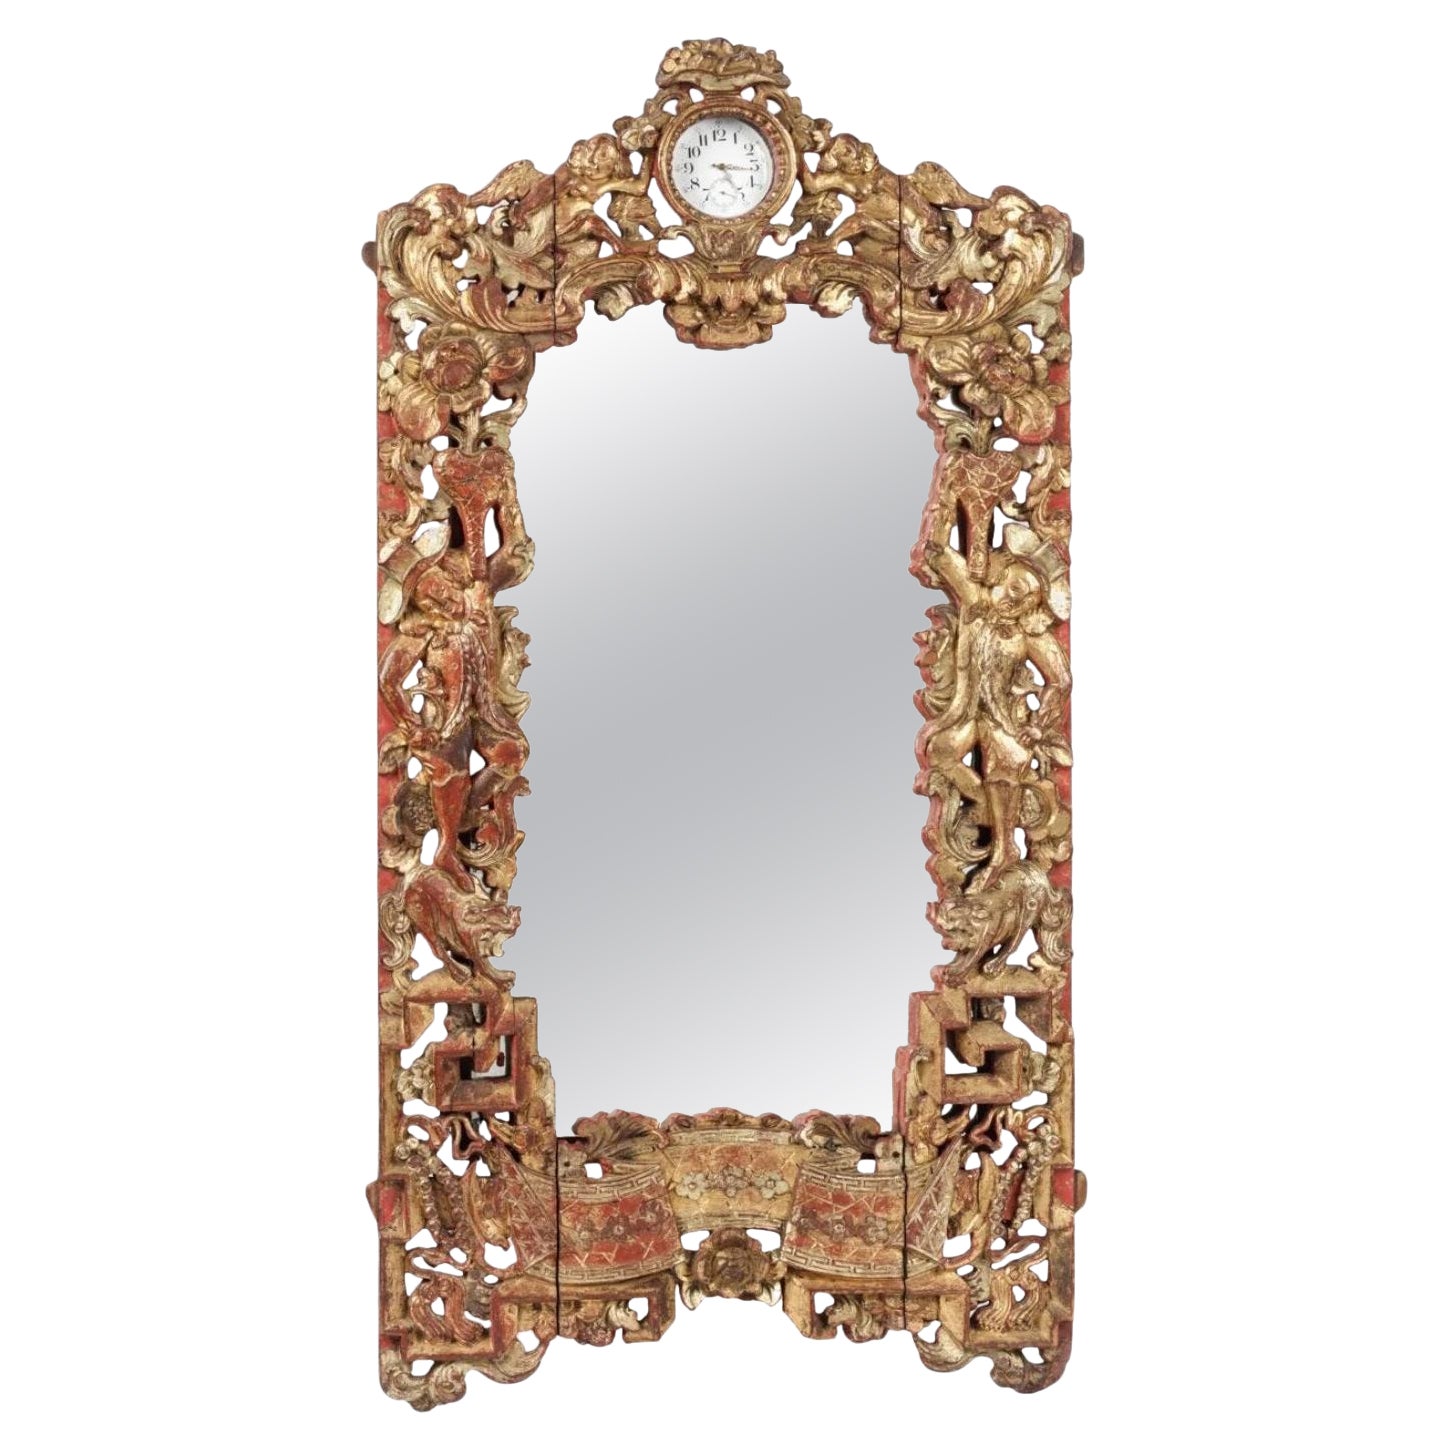 Charming carved gilt-wood Chinese export mirror frame watch-stand with Europeans